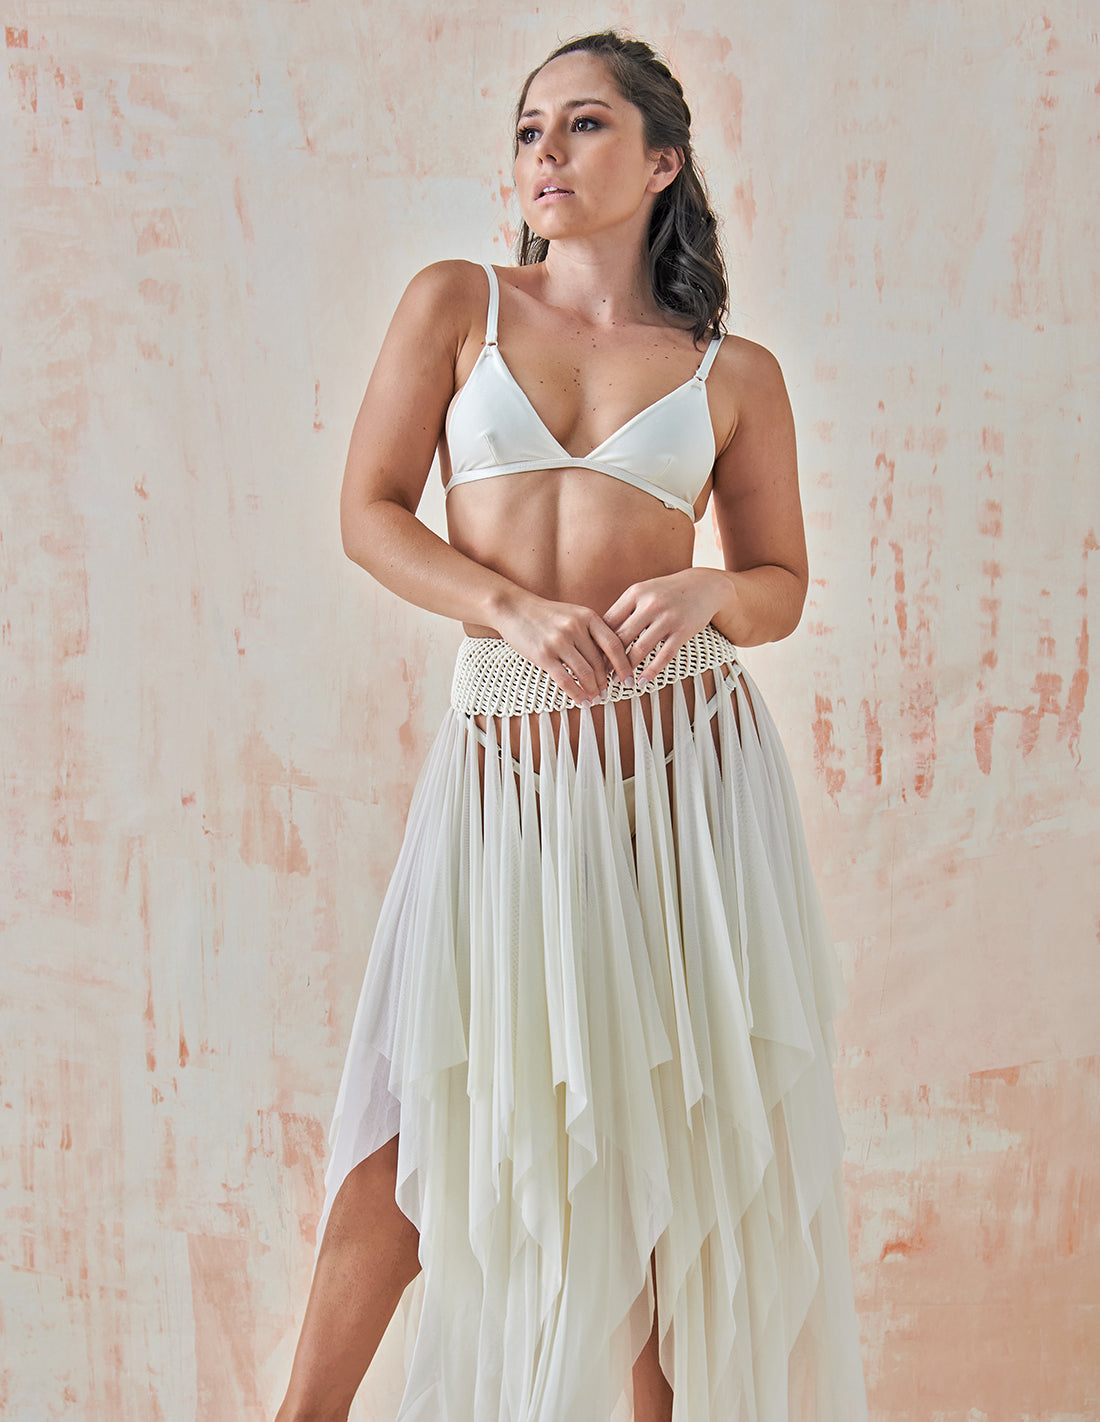 Remnant Skirt Ivory. Beach Skirt With Hand Woven Macramé In Ivory. Entreaguas